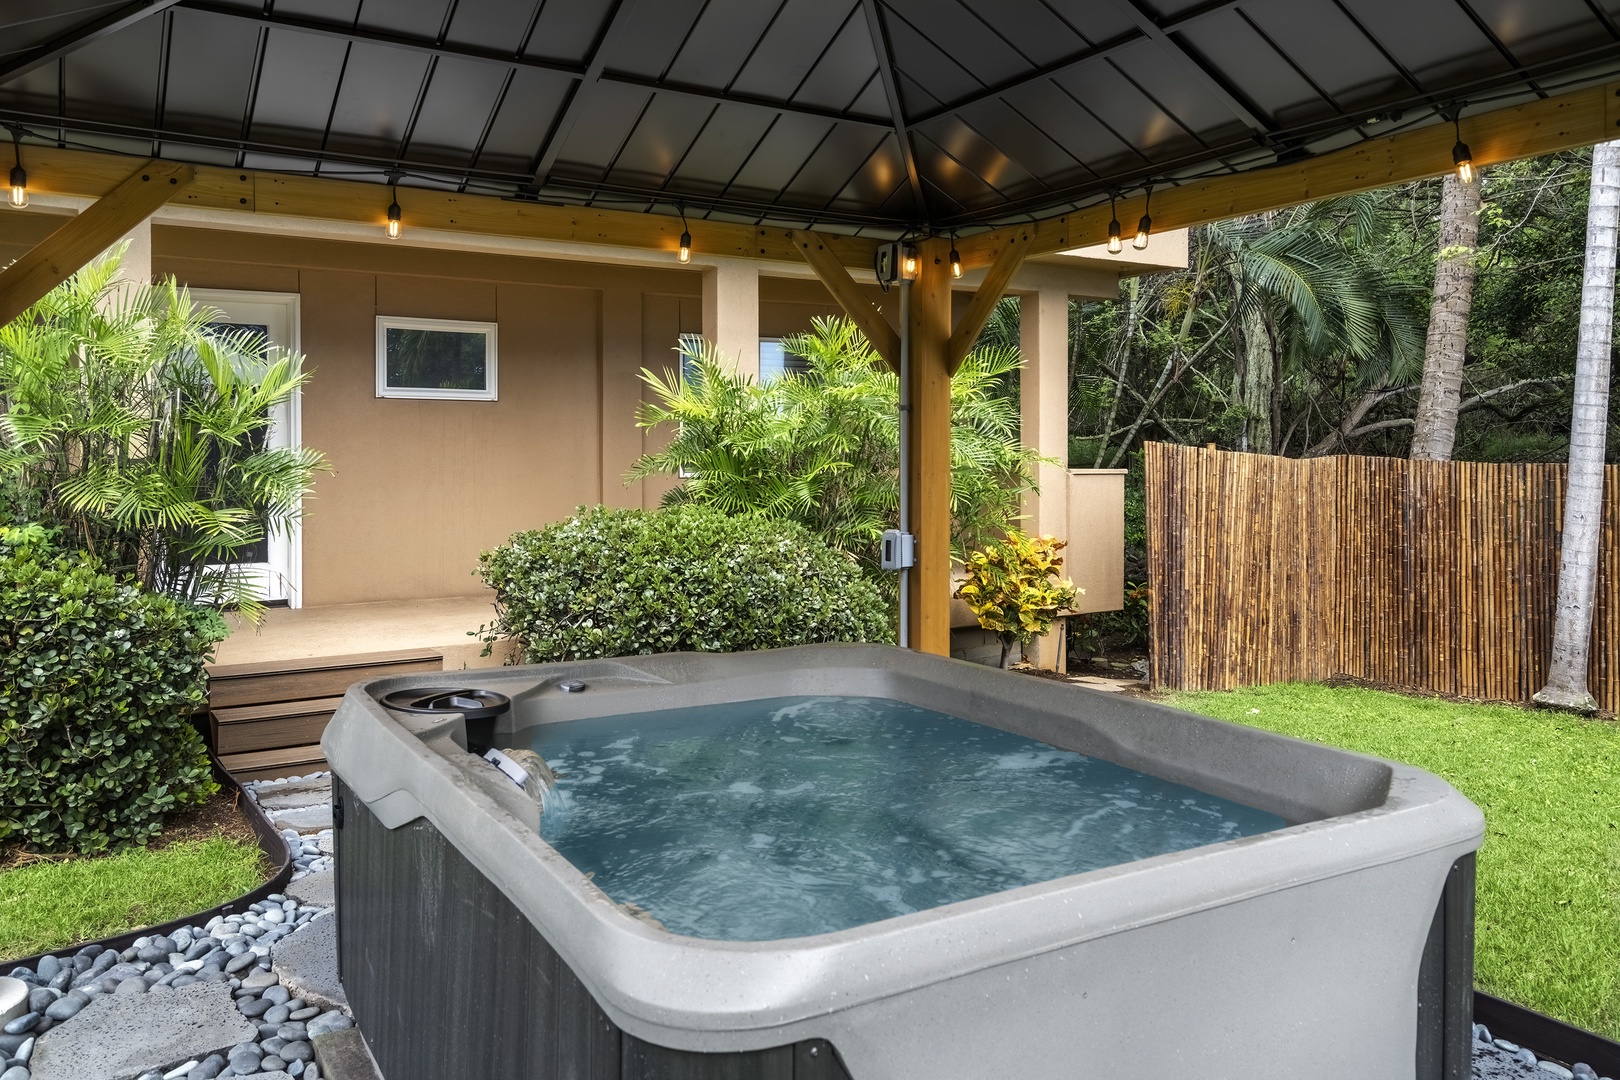 Kailua Kona Vacation Rentals, Lymans Bay Hale - Hot tub in the front of the home!